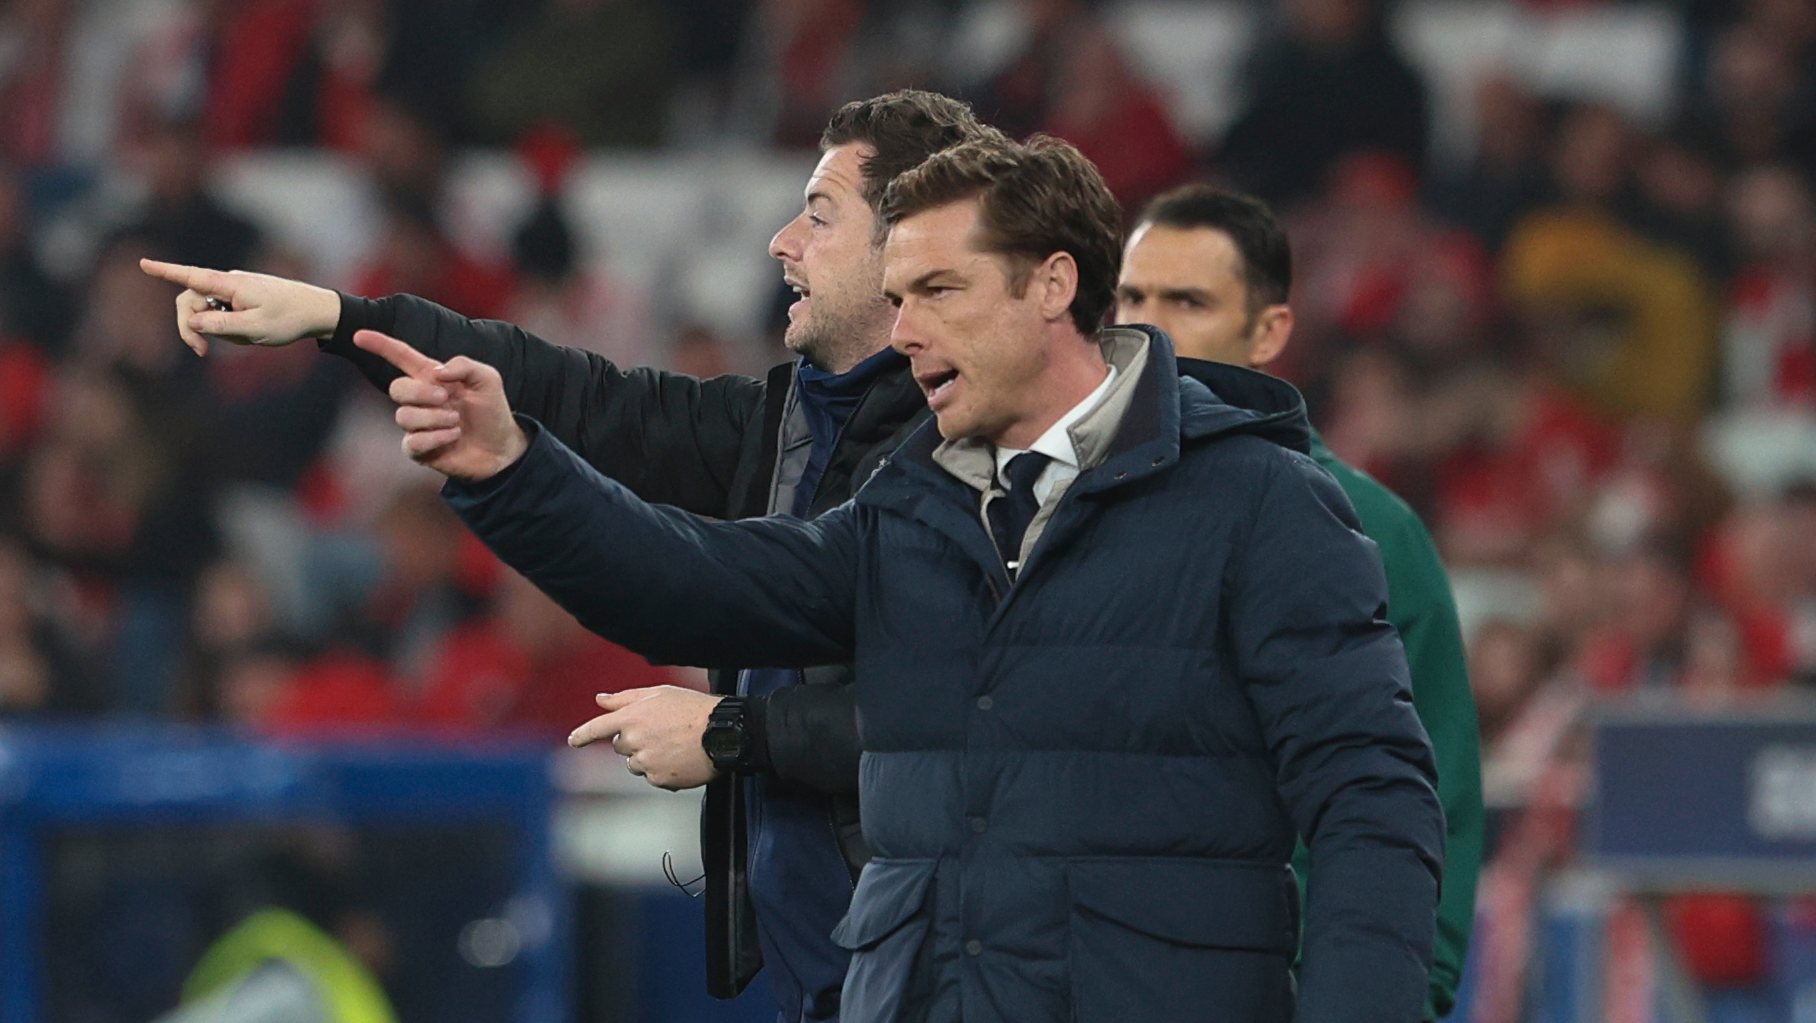 Club Brugge`s head coach Scott Parker reacts during their UEFA Champions League second leg soccer match with Benfica held at Luz Stadium in Lisbon, Portugal, 07 March 2023.  ANTÓNIO COTRIM/LUSA